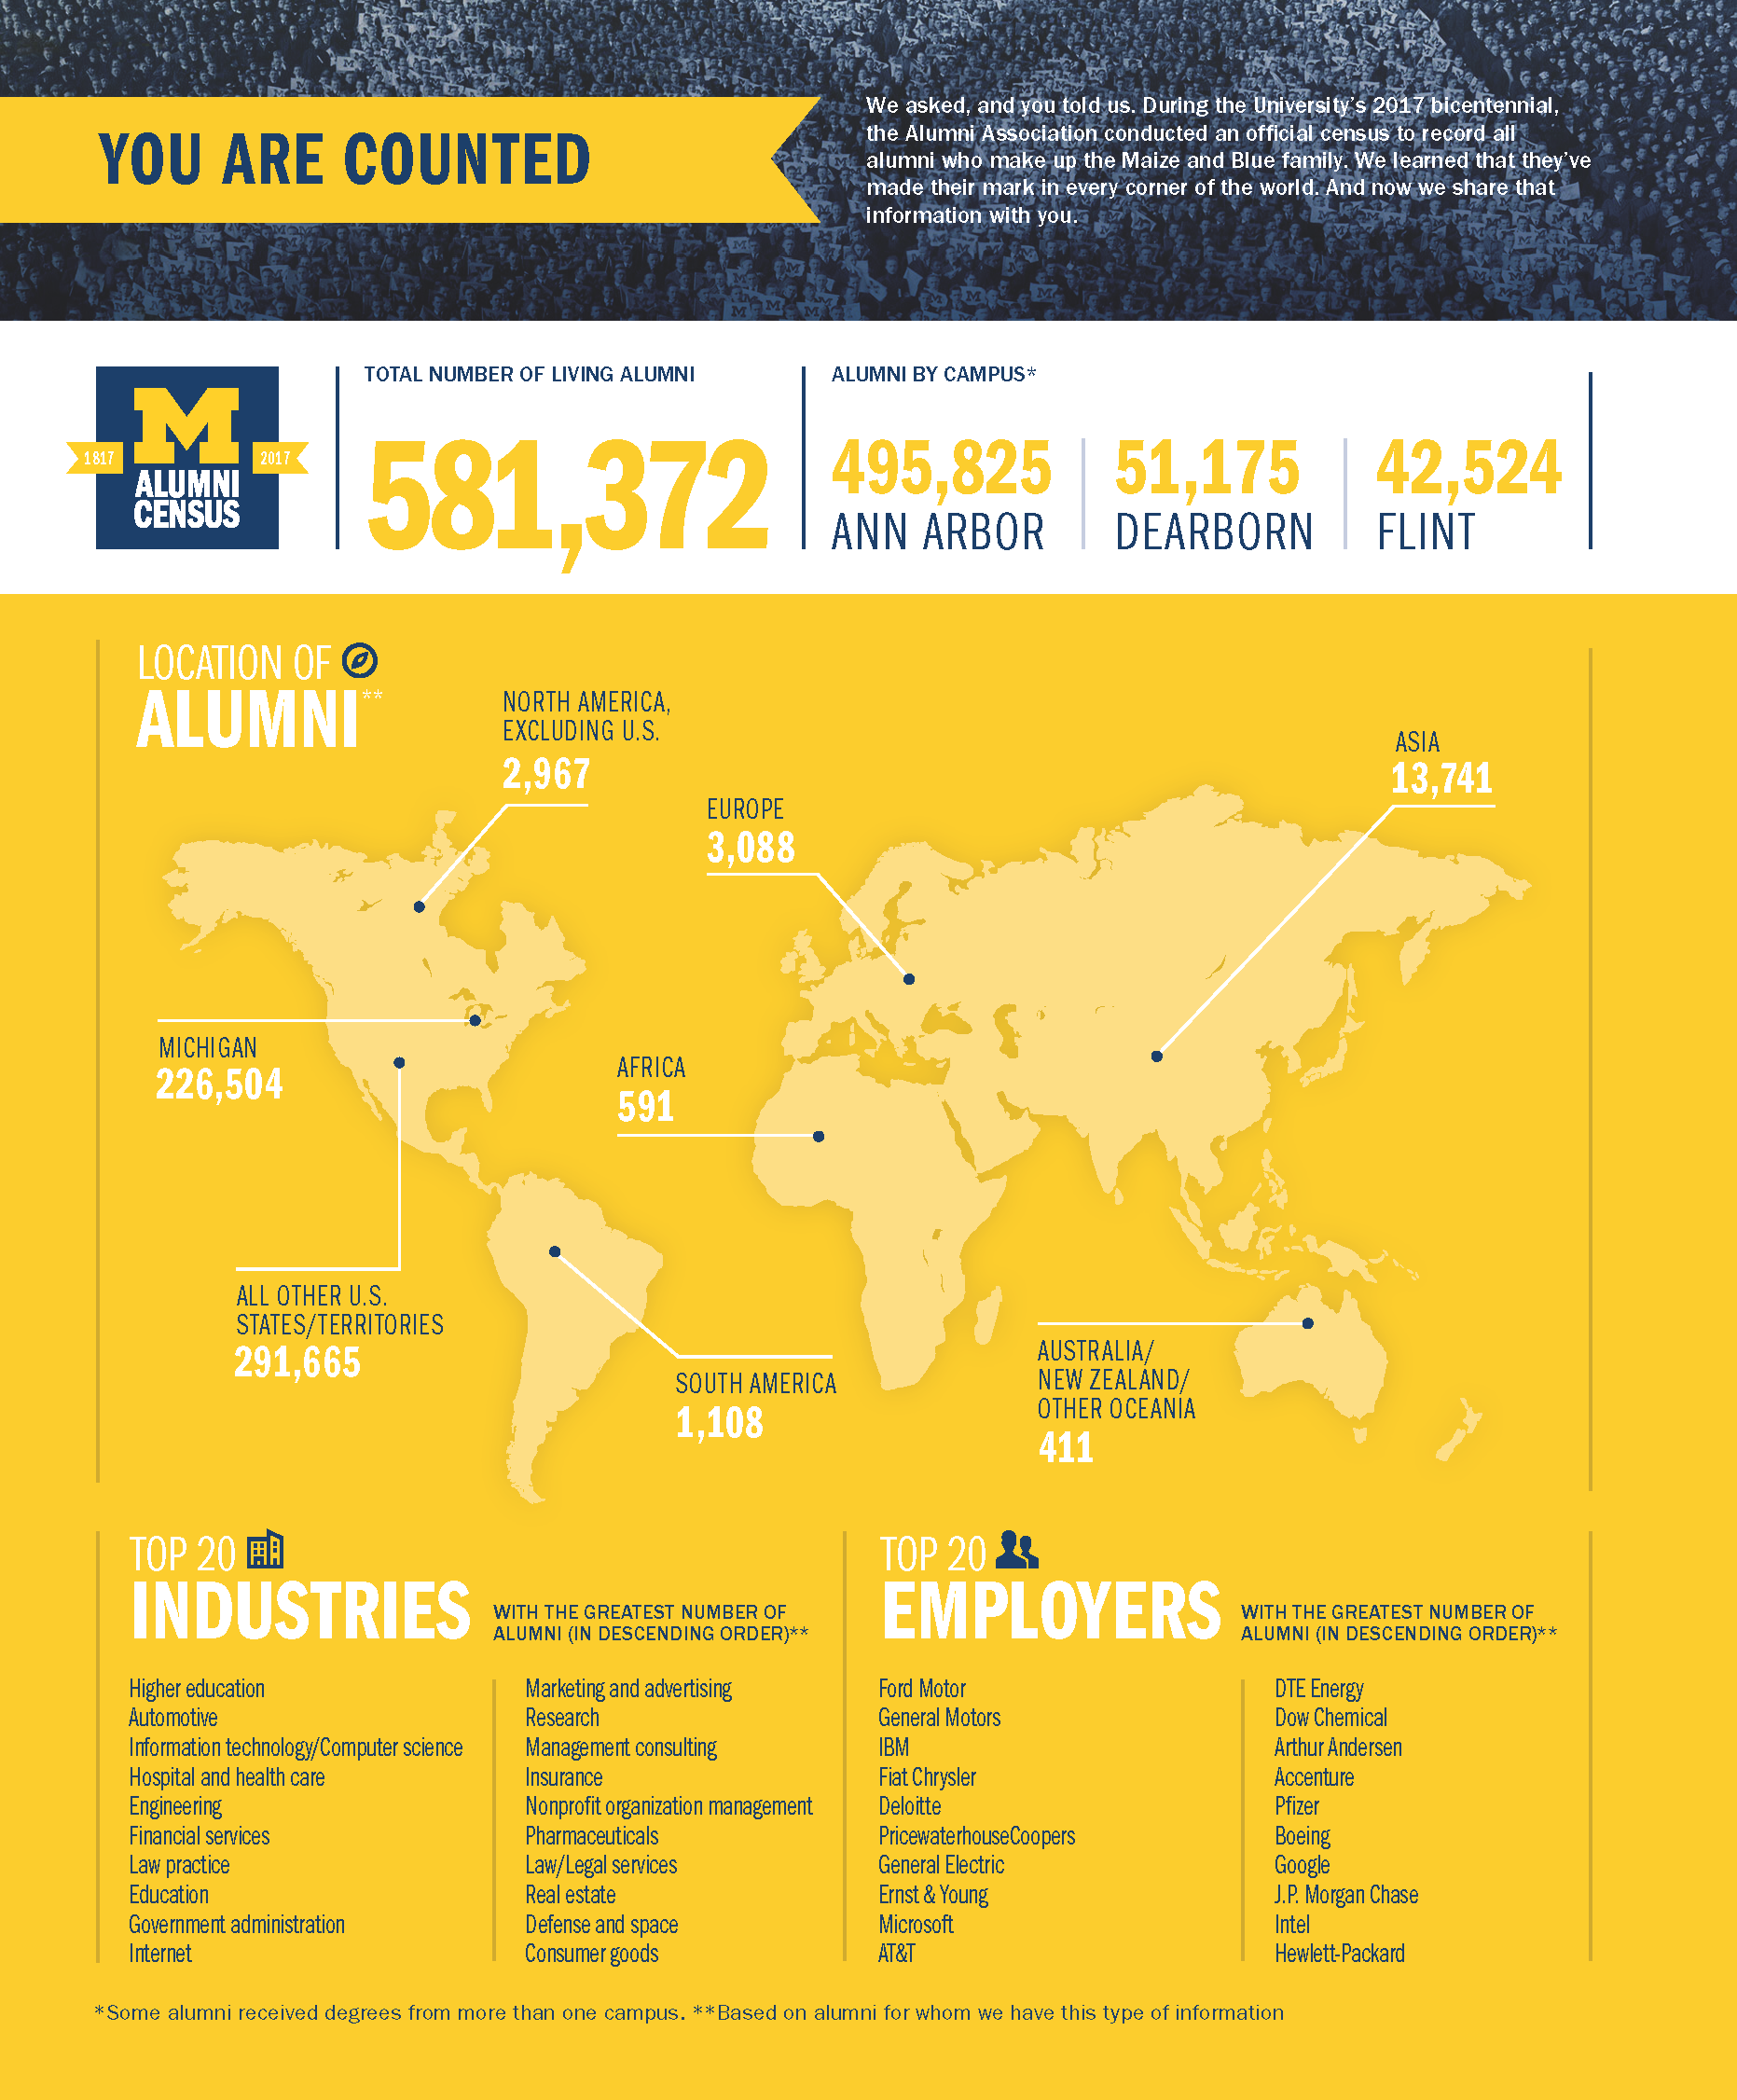 During U-M’s 2017 bicentennial, we conducted an official alumni census. Here's what we learned about where alumni have made their mark.